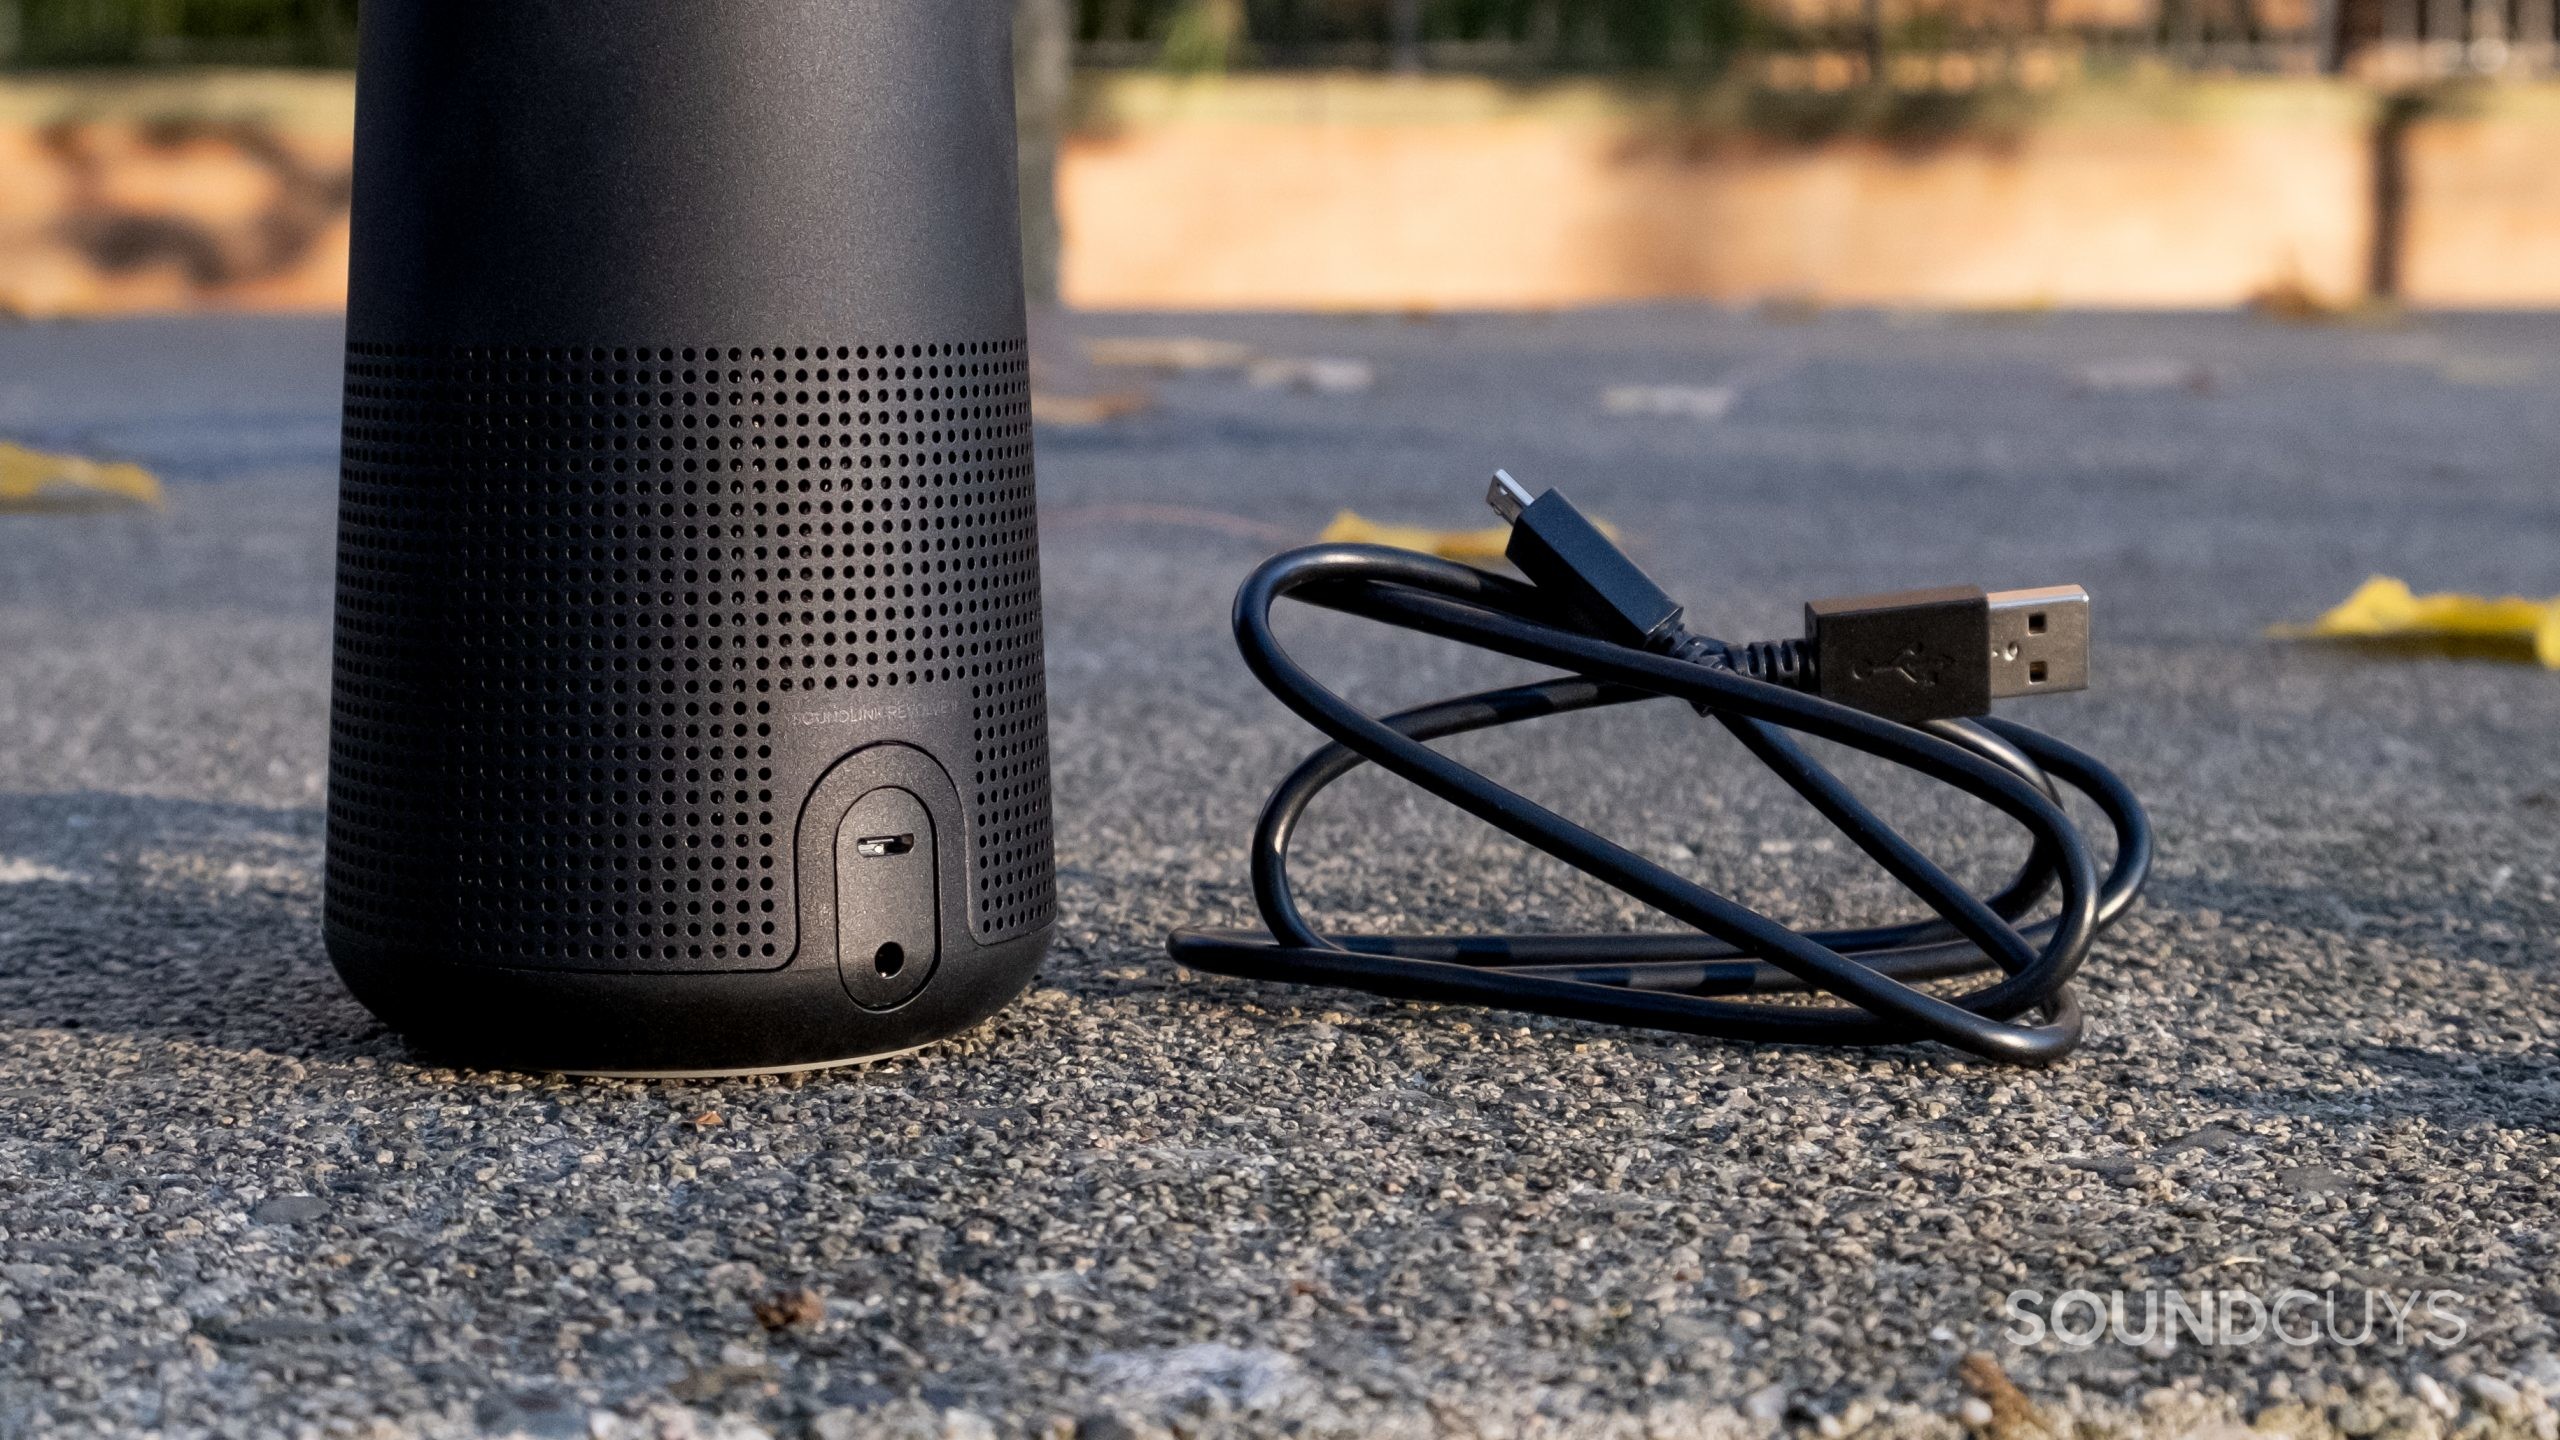 A close up of the Bose SoundLink Revolve II showing the aux in and charging port with the microUSB cable.